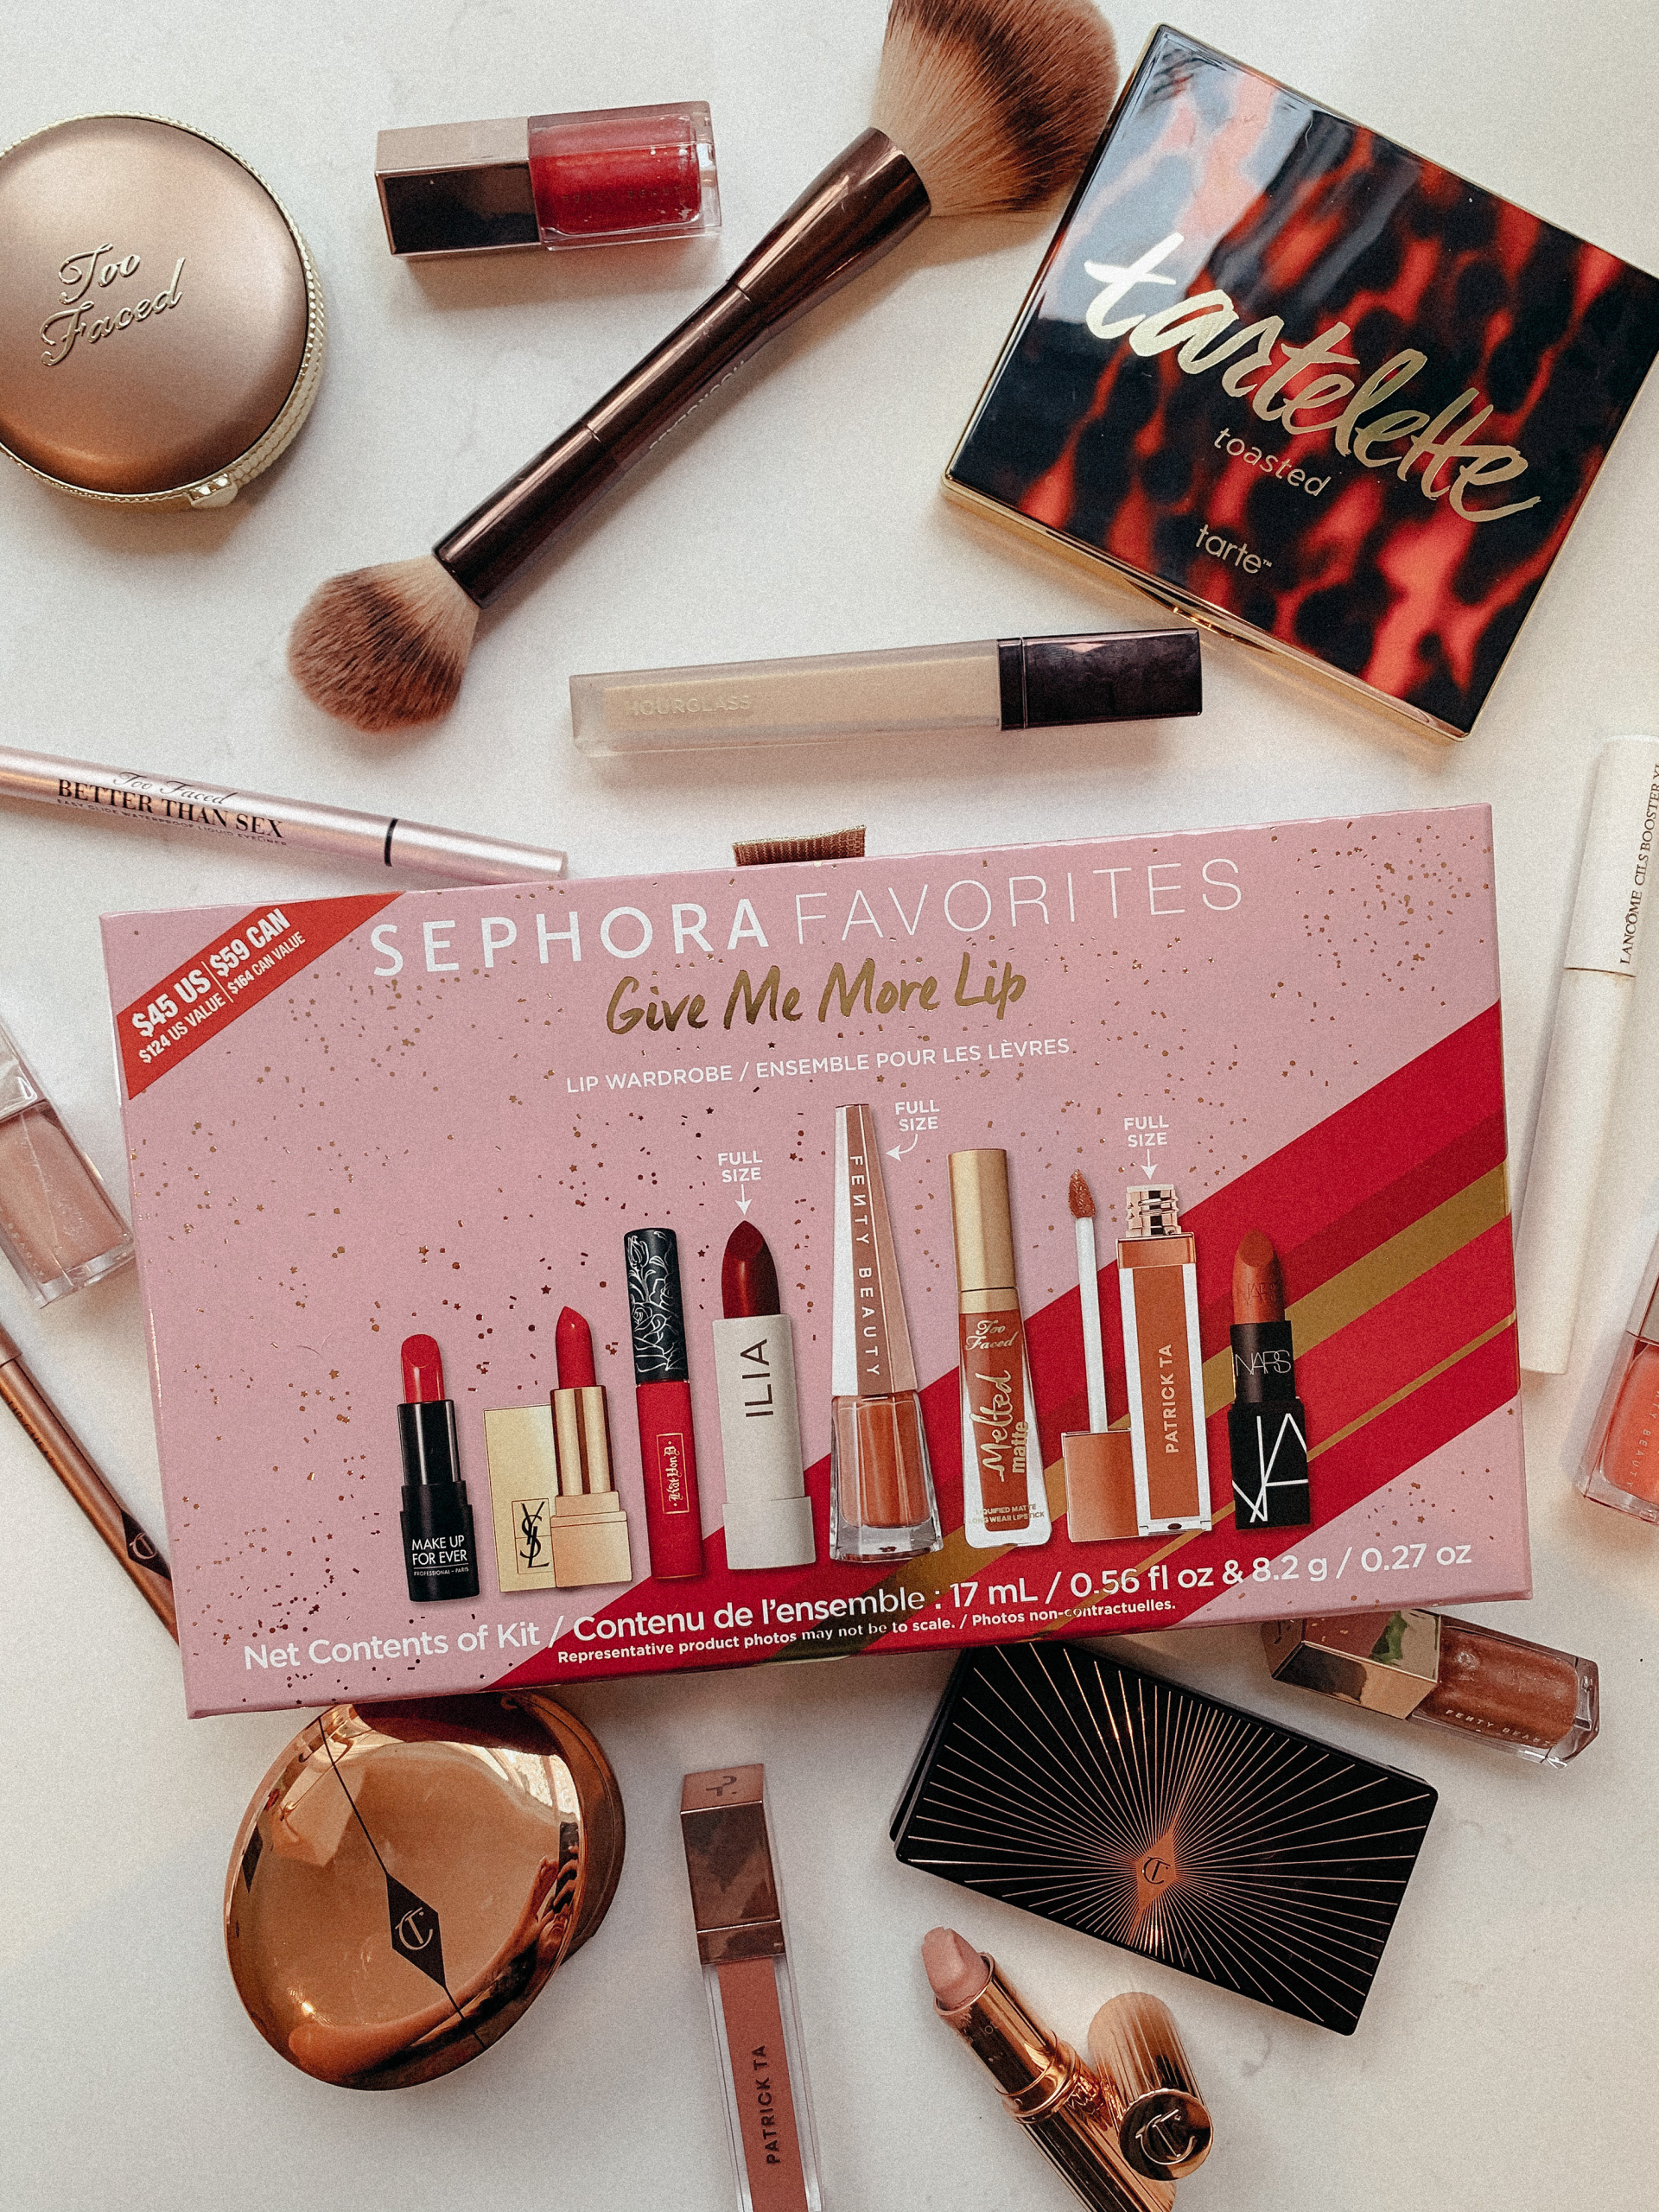 Four New Sephora Kits Available Now + Coupons! - Hello Subscription